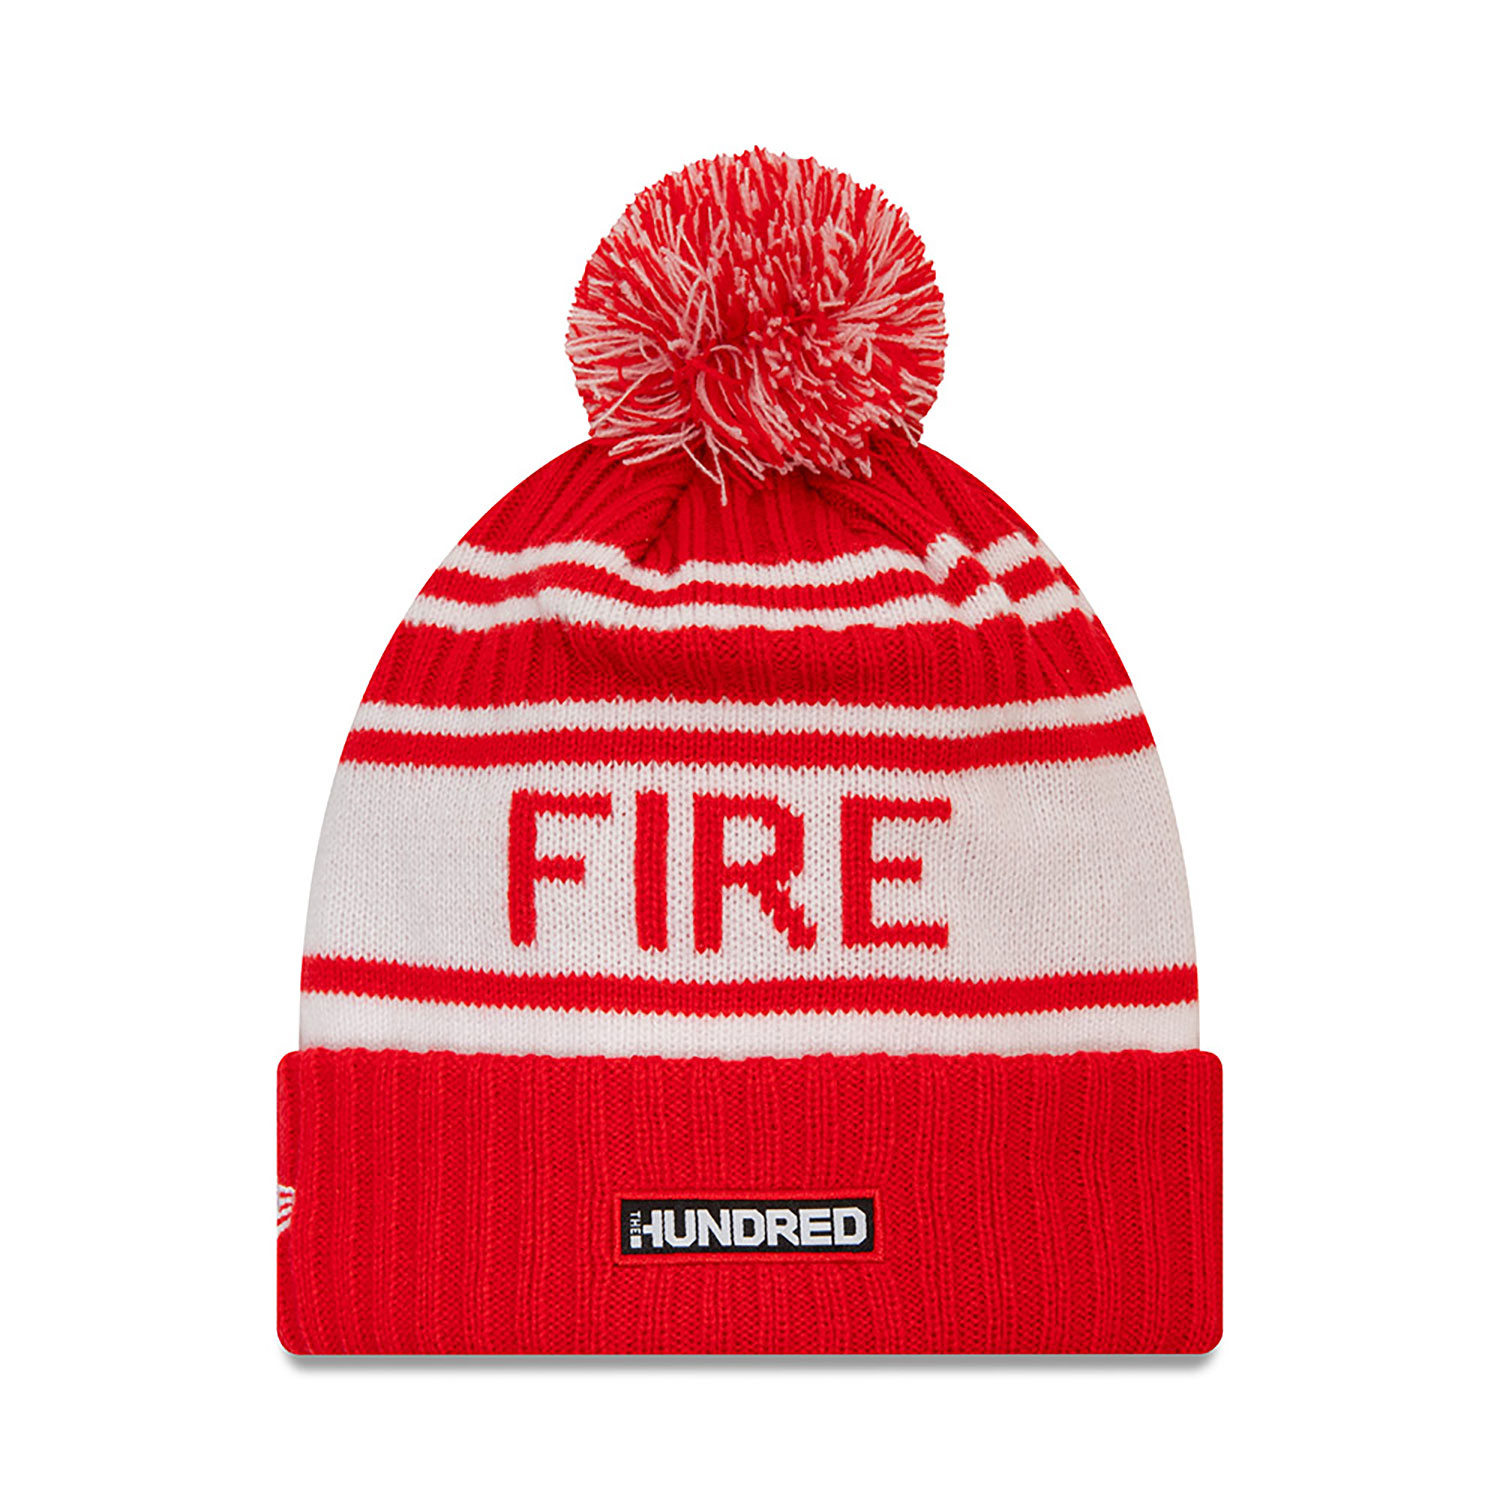 Welsh Fire Tan Cymreig The Hundred Red Bobble Knit Beanie Hat